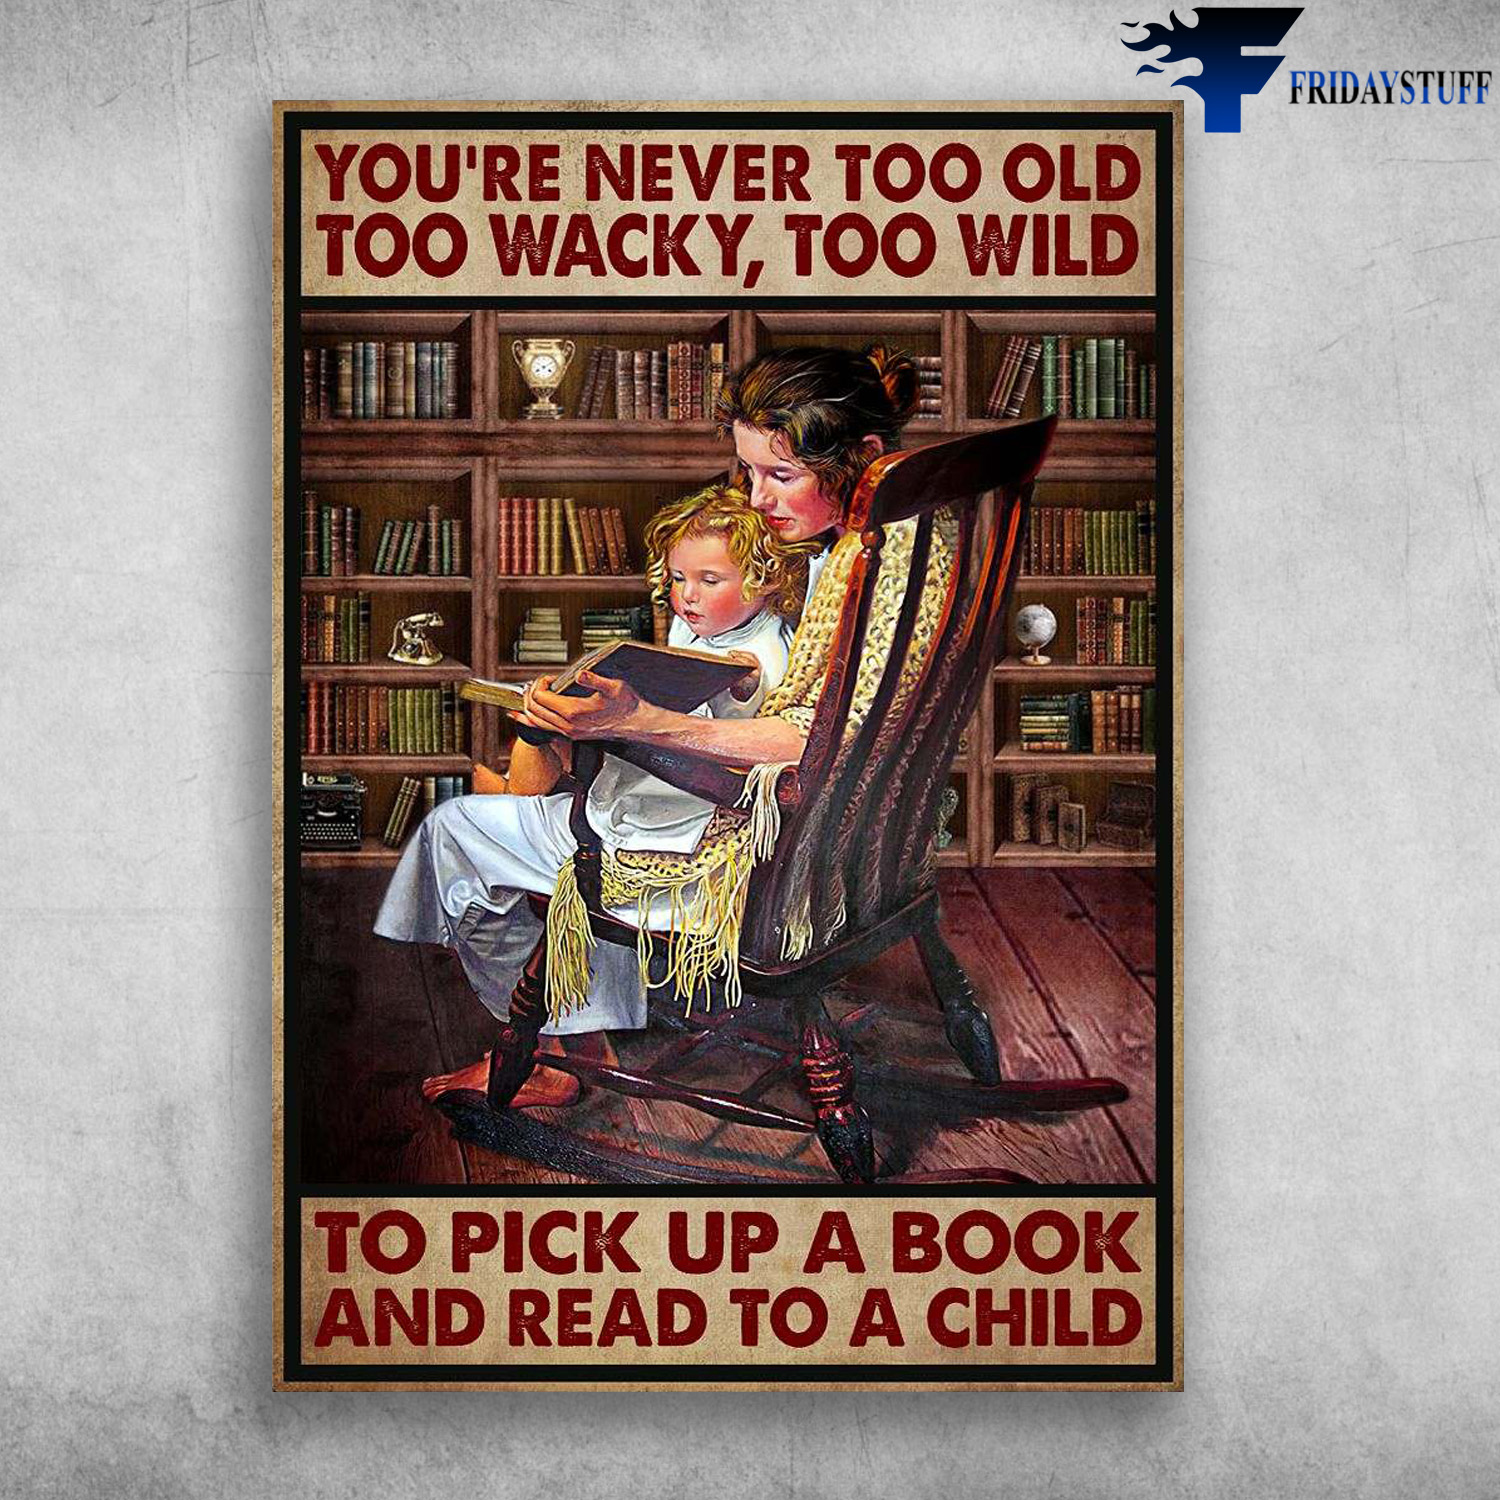 Mom And Daughter Youre Never Too Old Too Wackey Too Wild To Pick Up A Book And Read To A